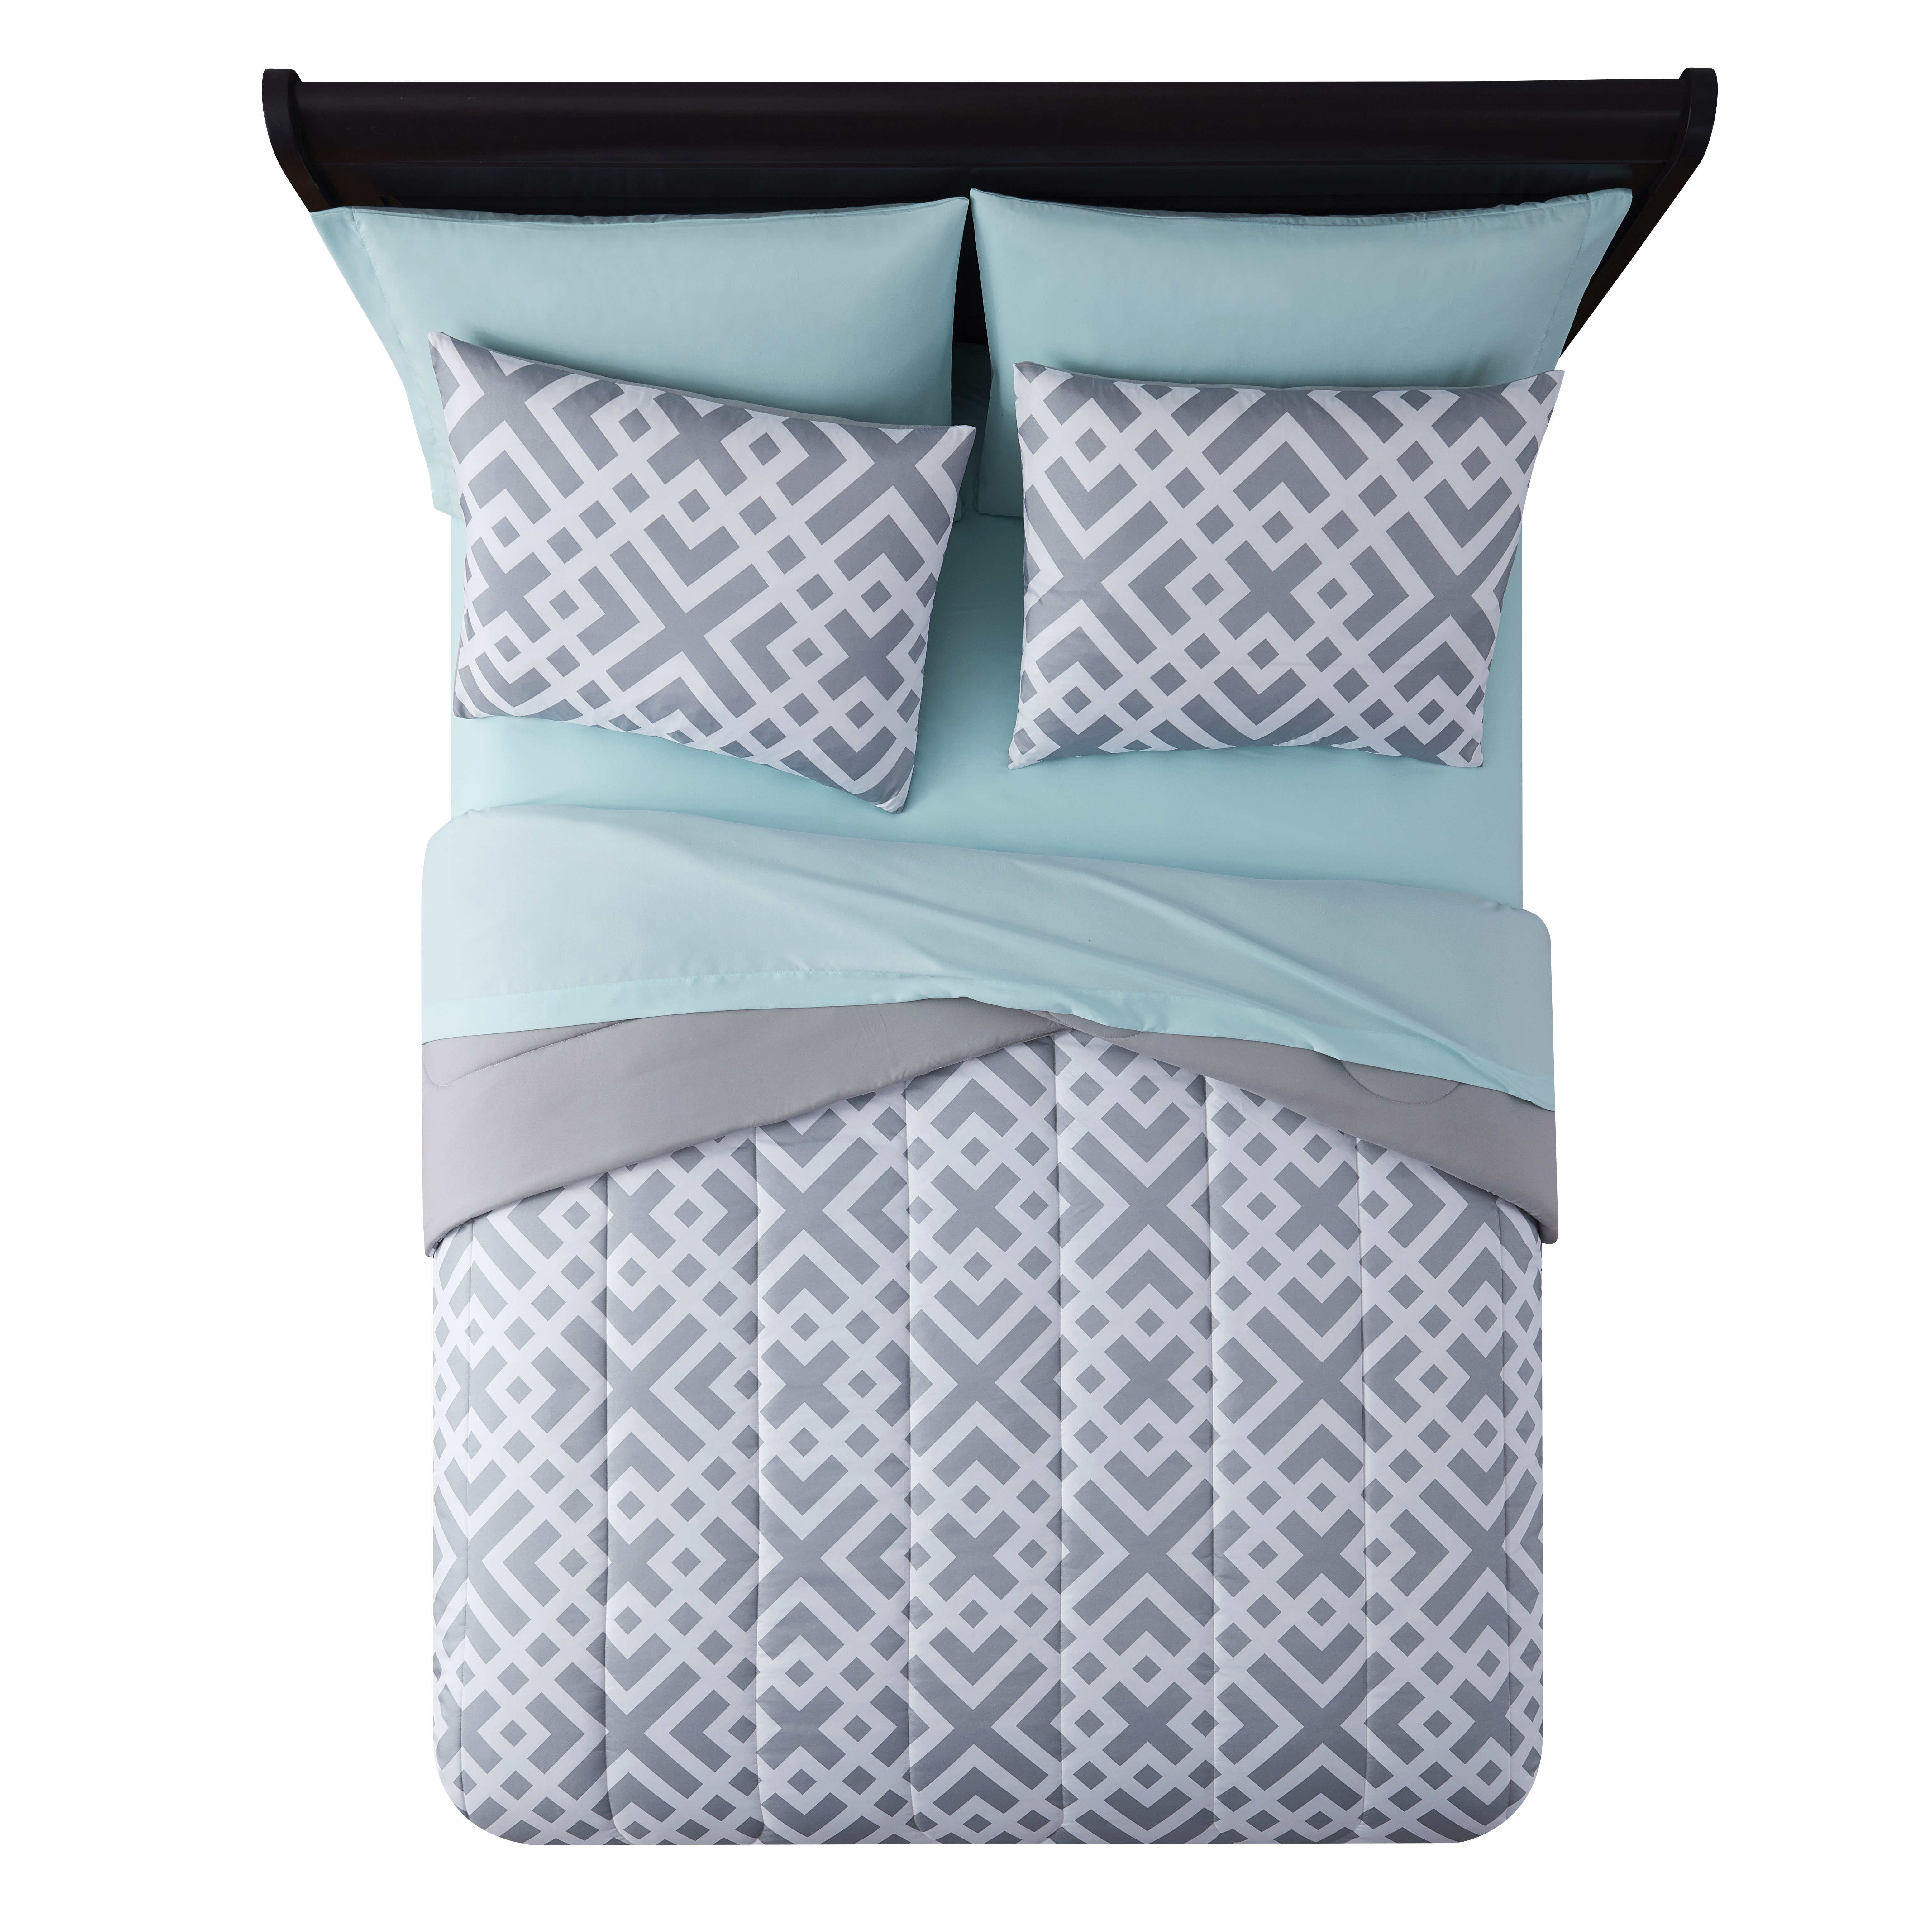 Mainstays Gray Geometric 6 Piece Bed in a Bag Comforter Set with Sheets, Twin/Twin-XL - image 3 of 10